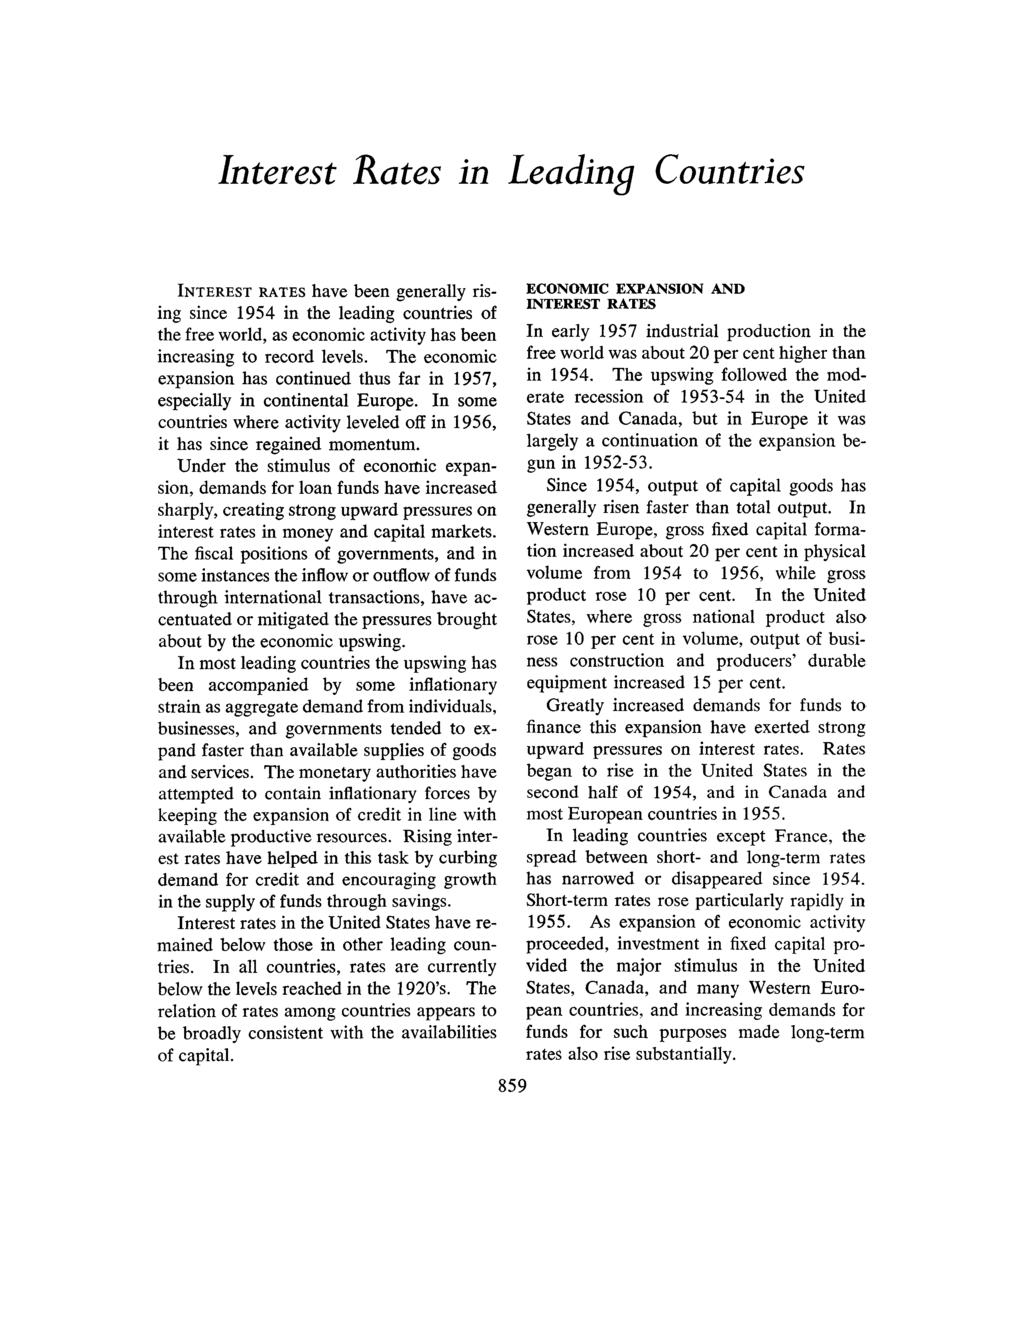 Interest Rates in Leading Countries have been generally rising since 1954 in the leading countries of the free world, as economic activity has been increasing to record levels.